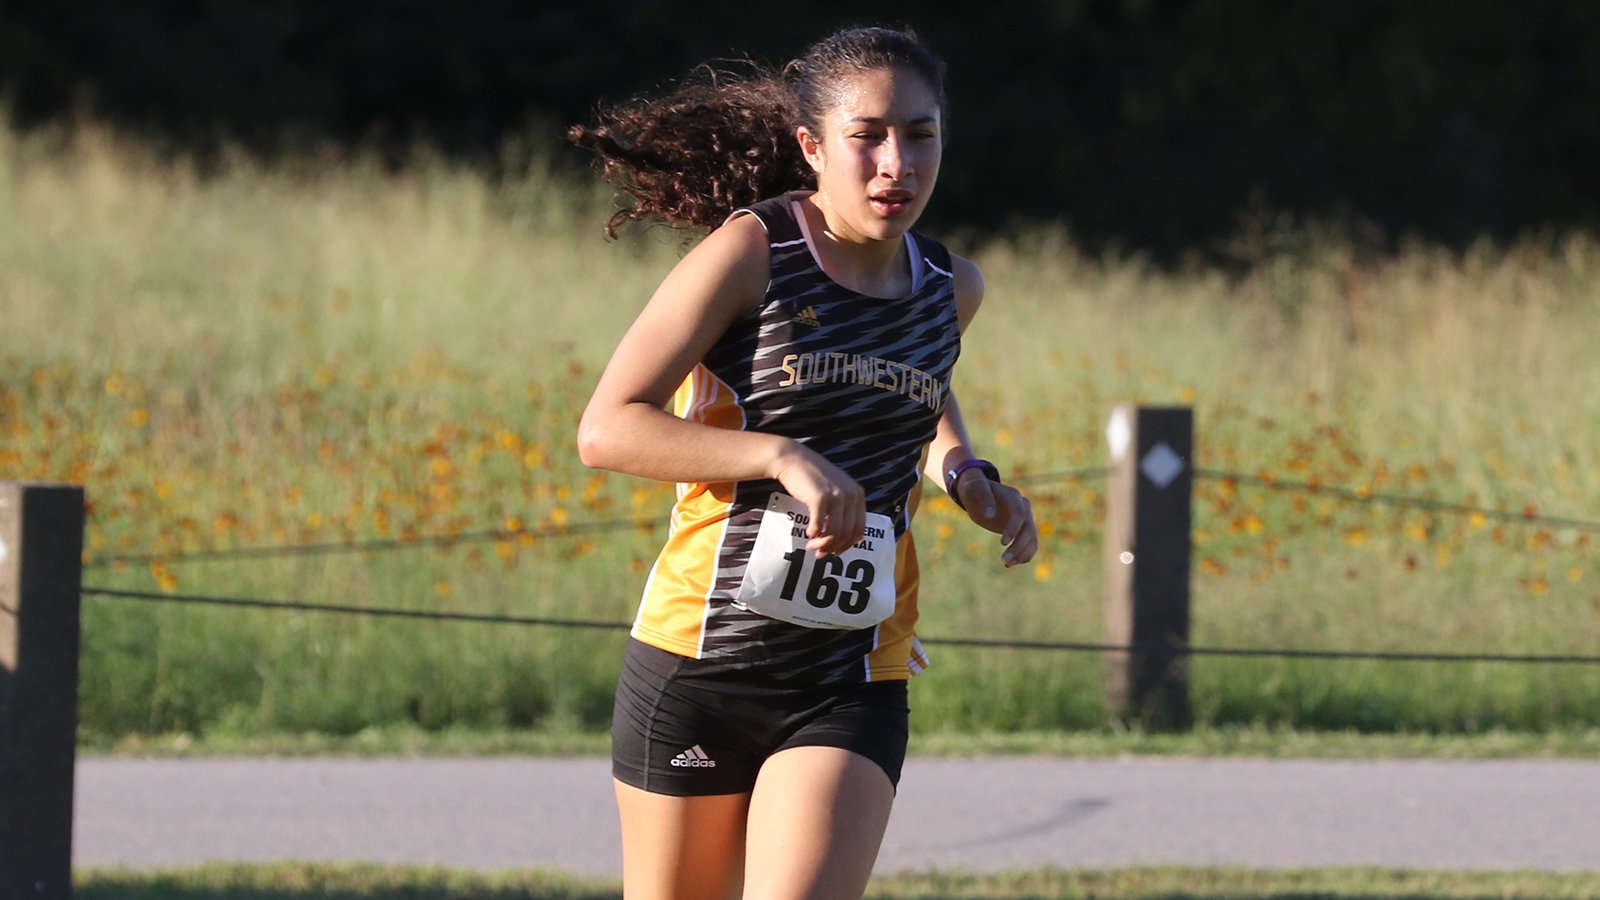 Pirate Women Place Third at Southwestern Invitational